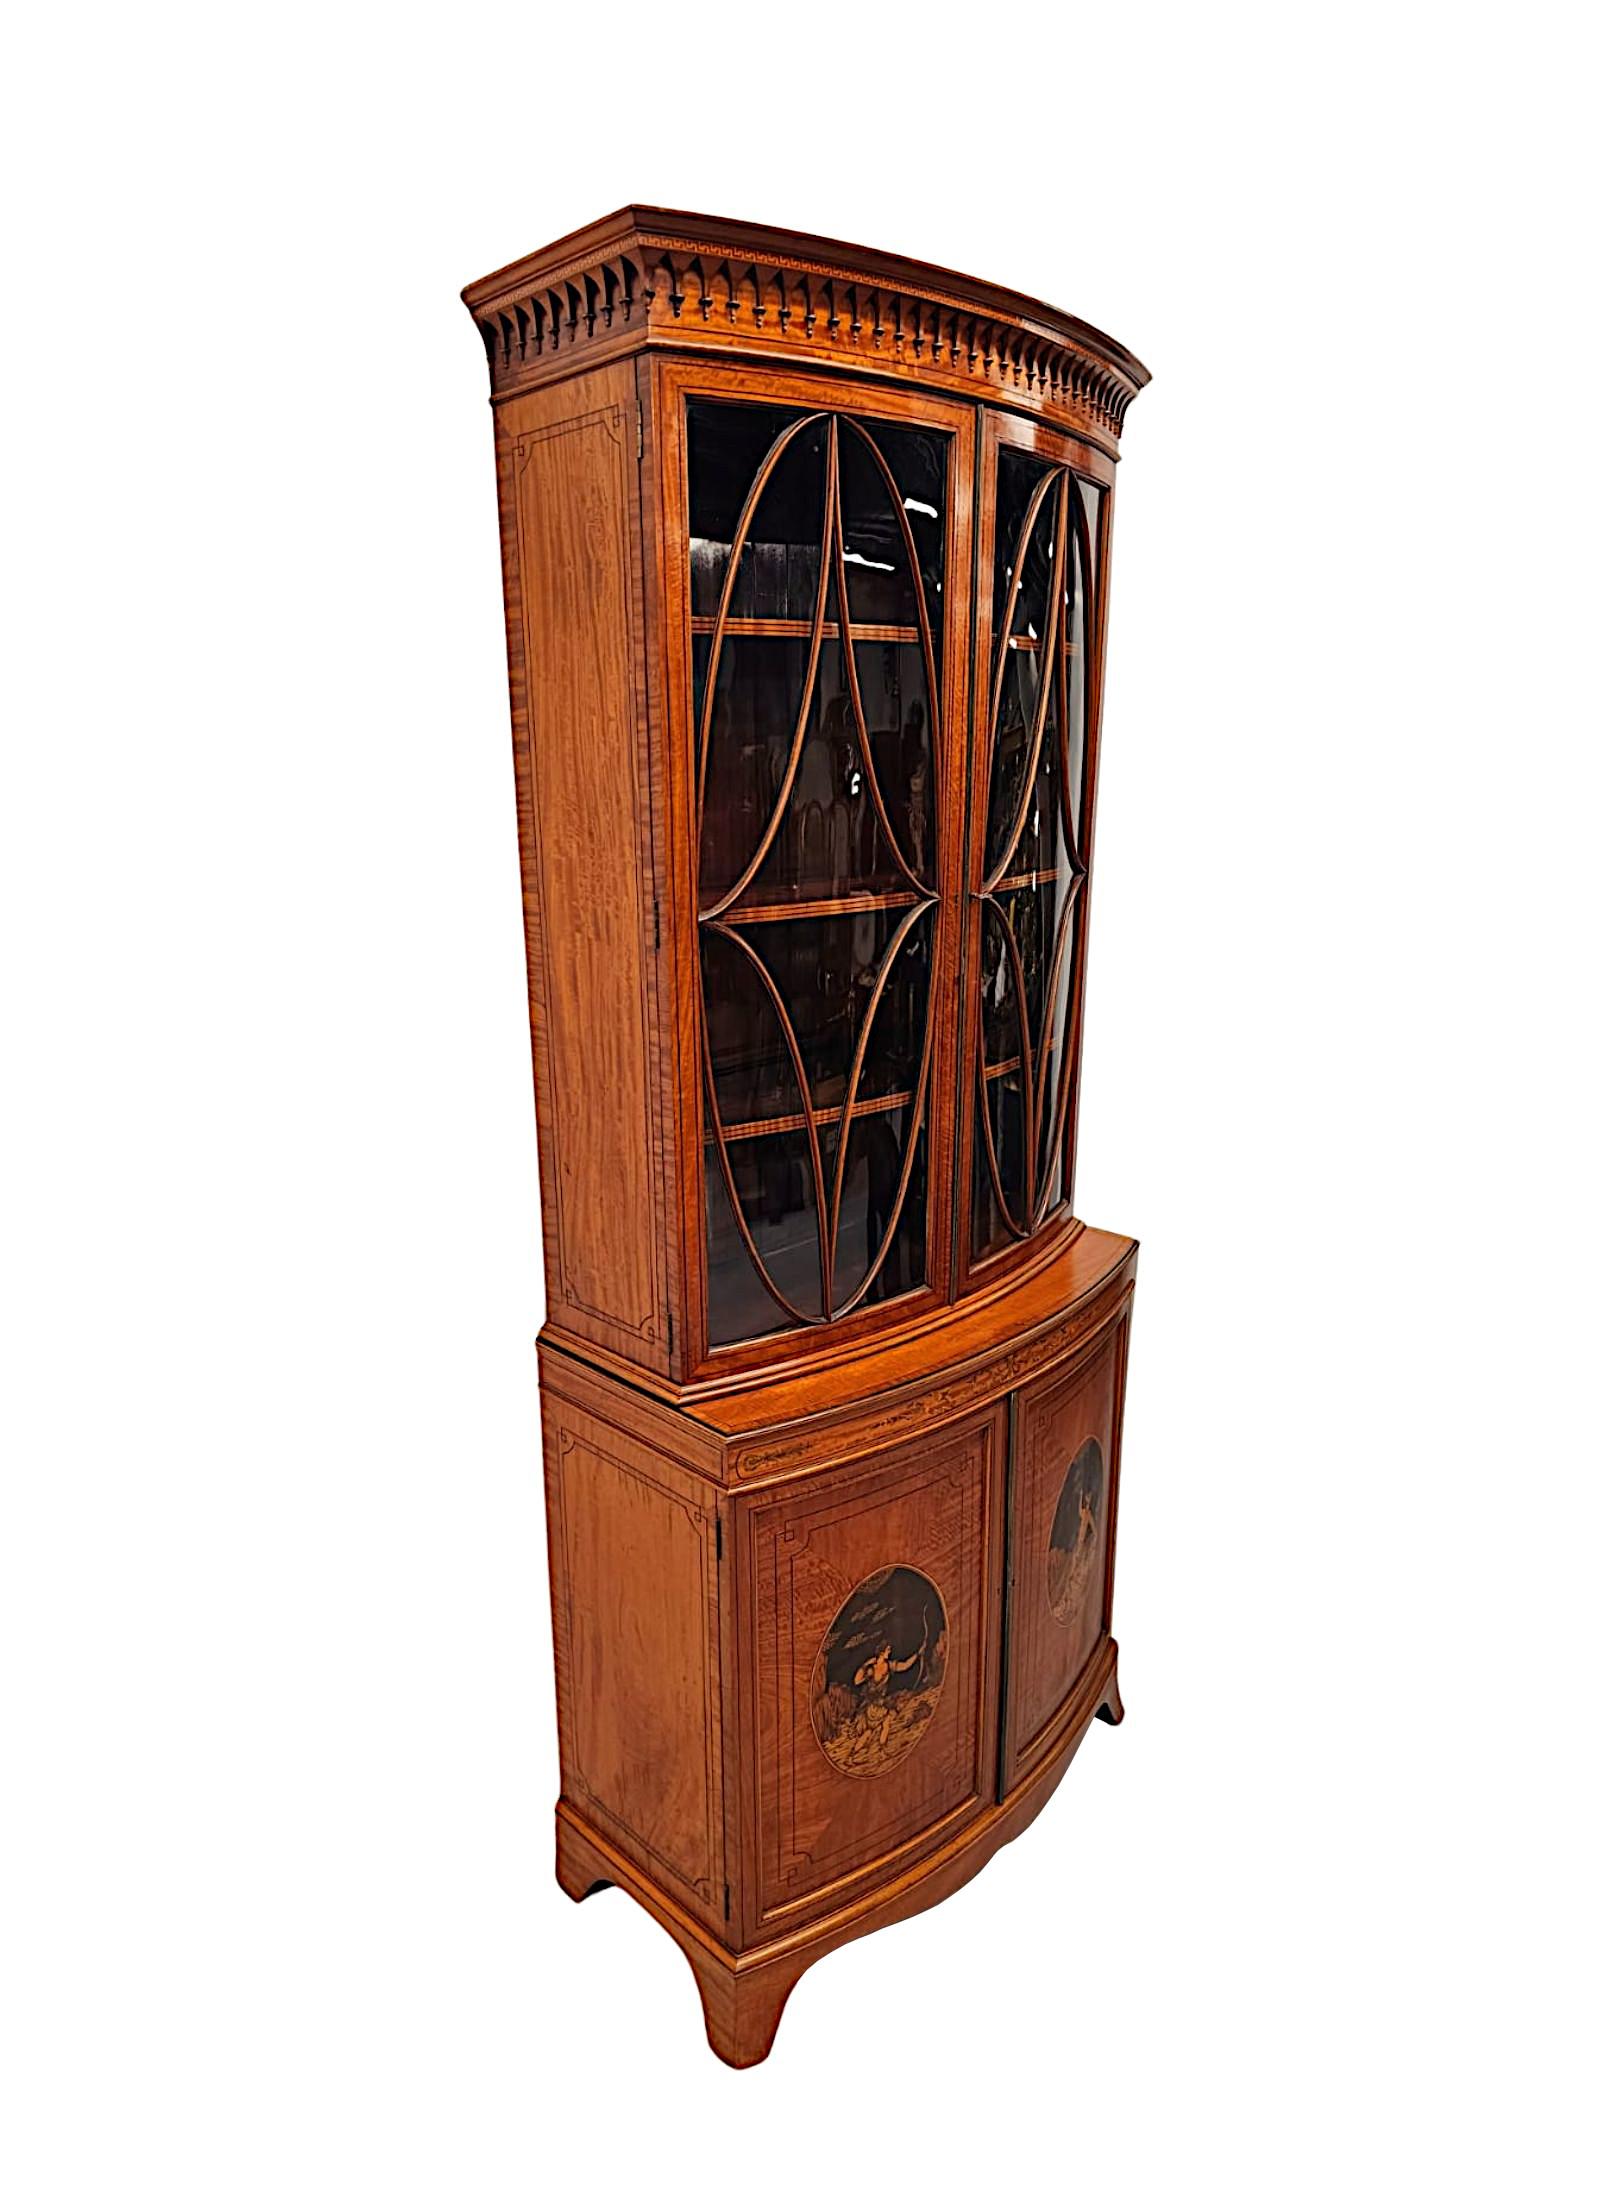 English A  Fine Edwardian Marquetry Inlaid Bowfronted Bookcase afterf Edward and Roberts For Sale